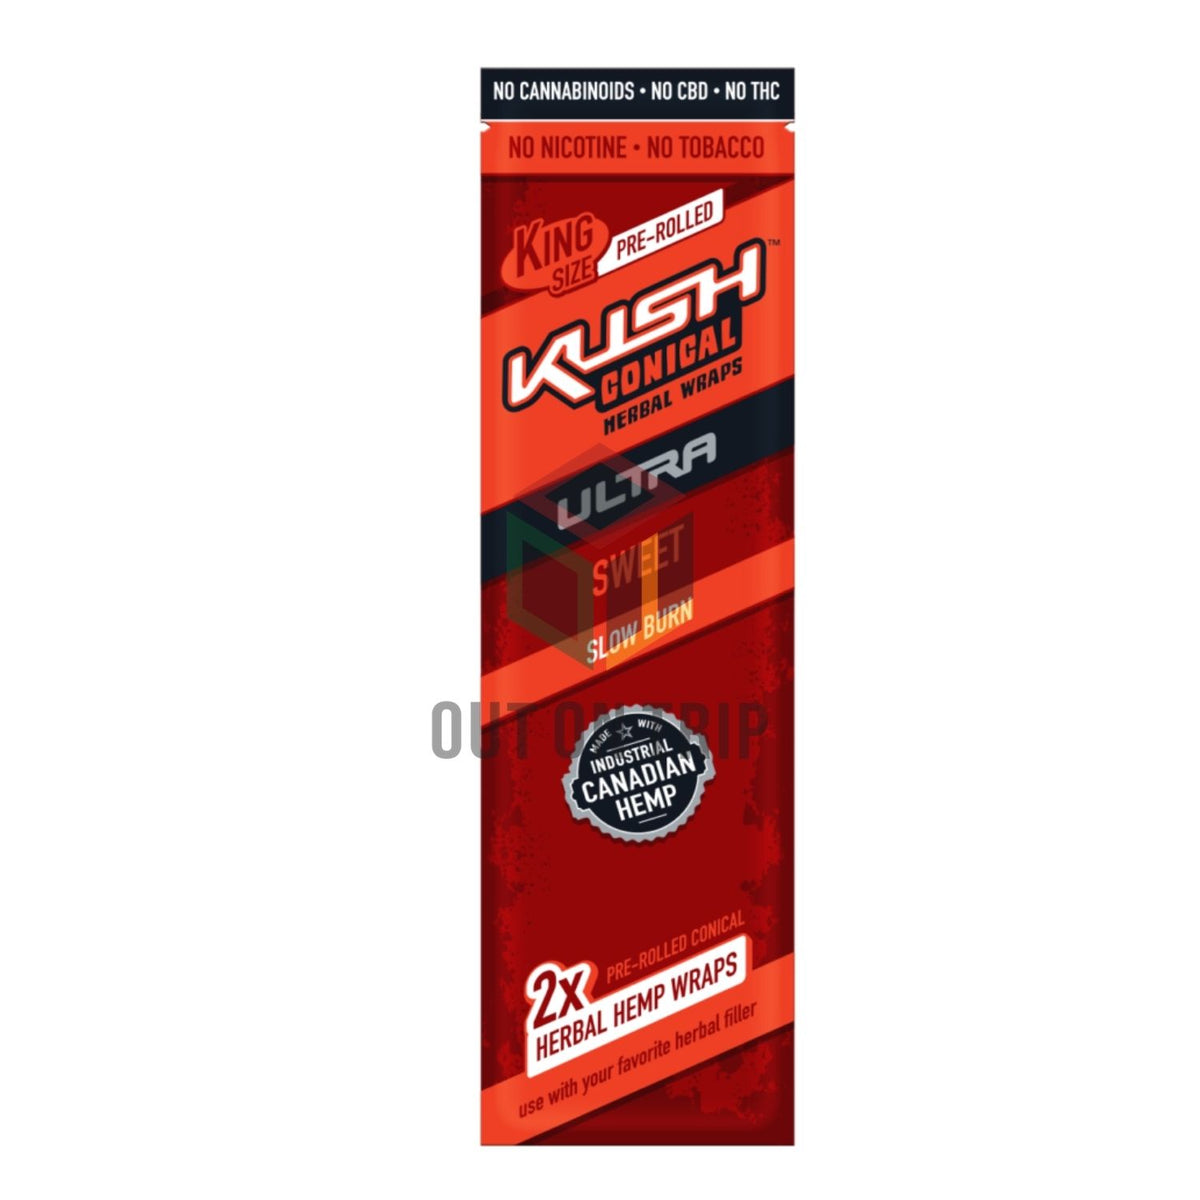 KUSH CONICAL HERBAL PREROLLED WRAPS ULTRA - Sweet